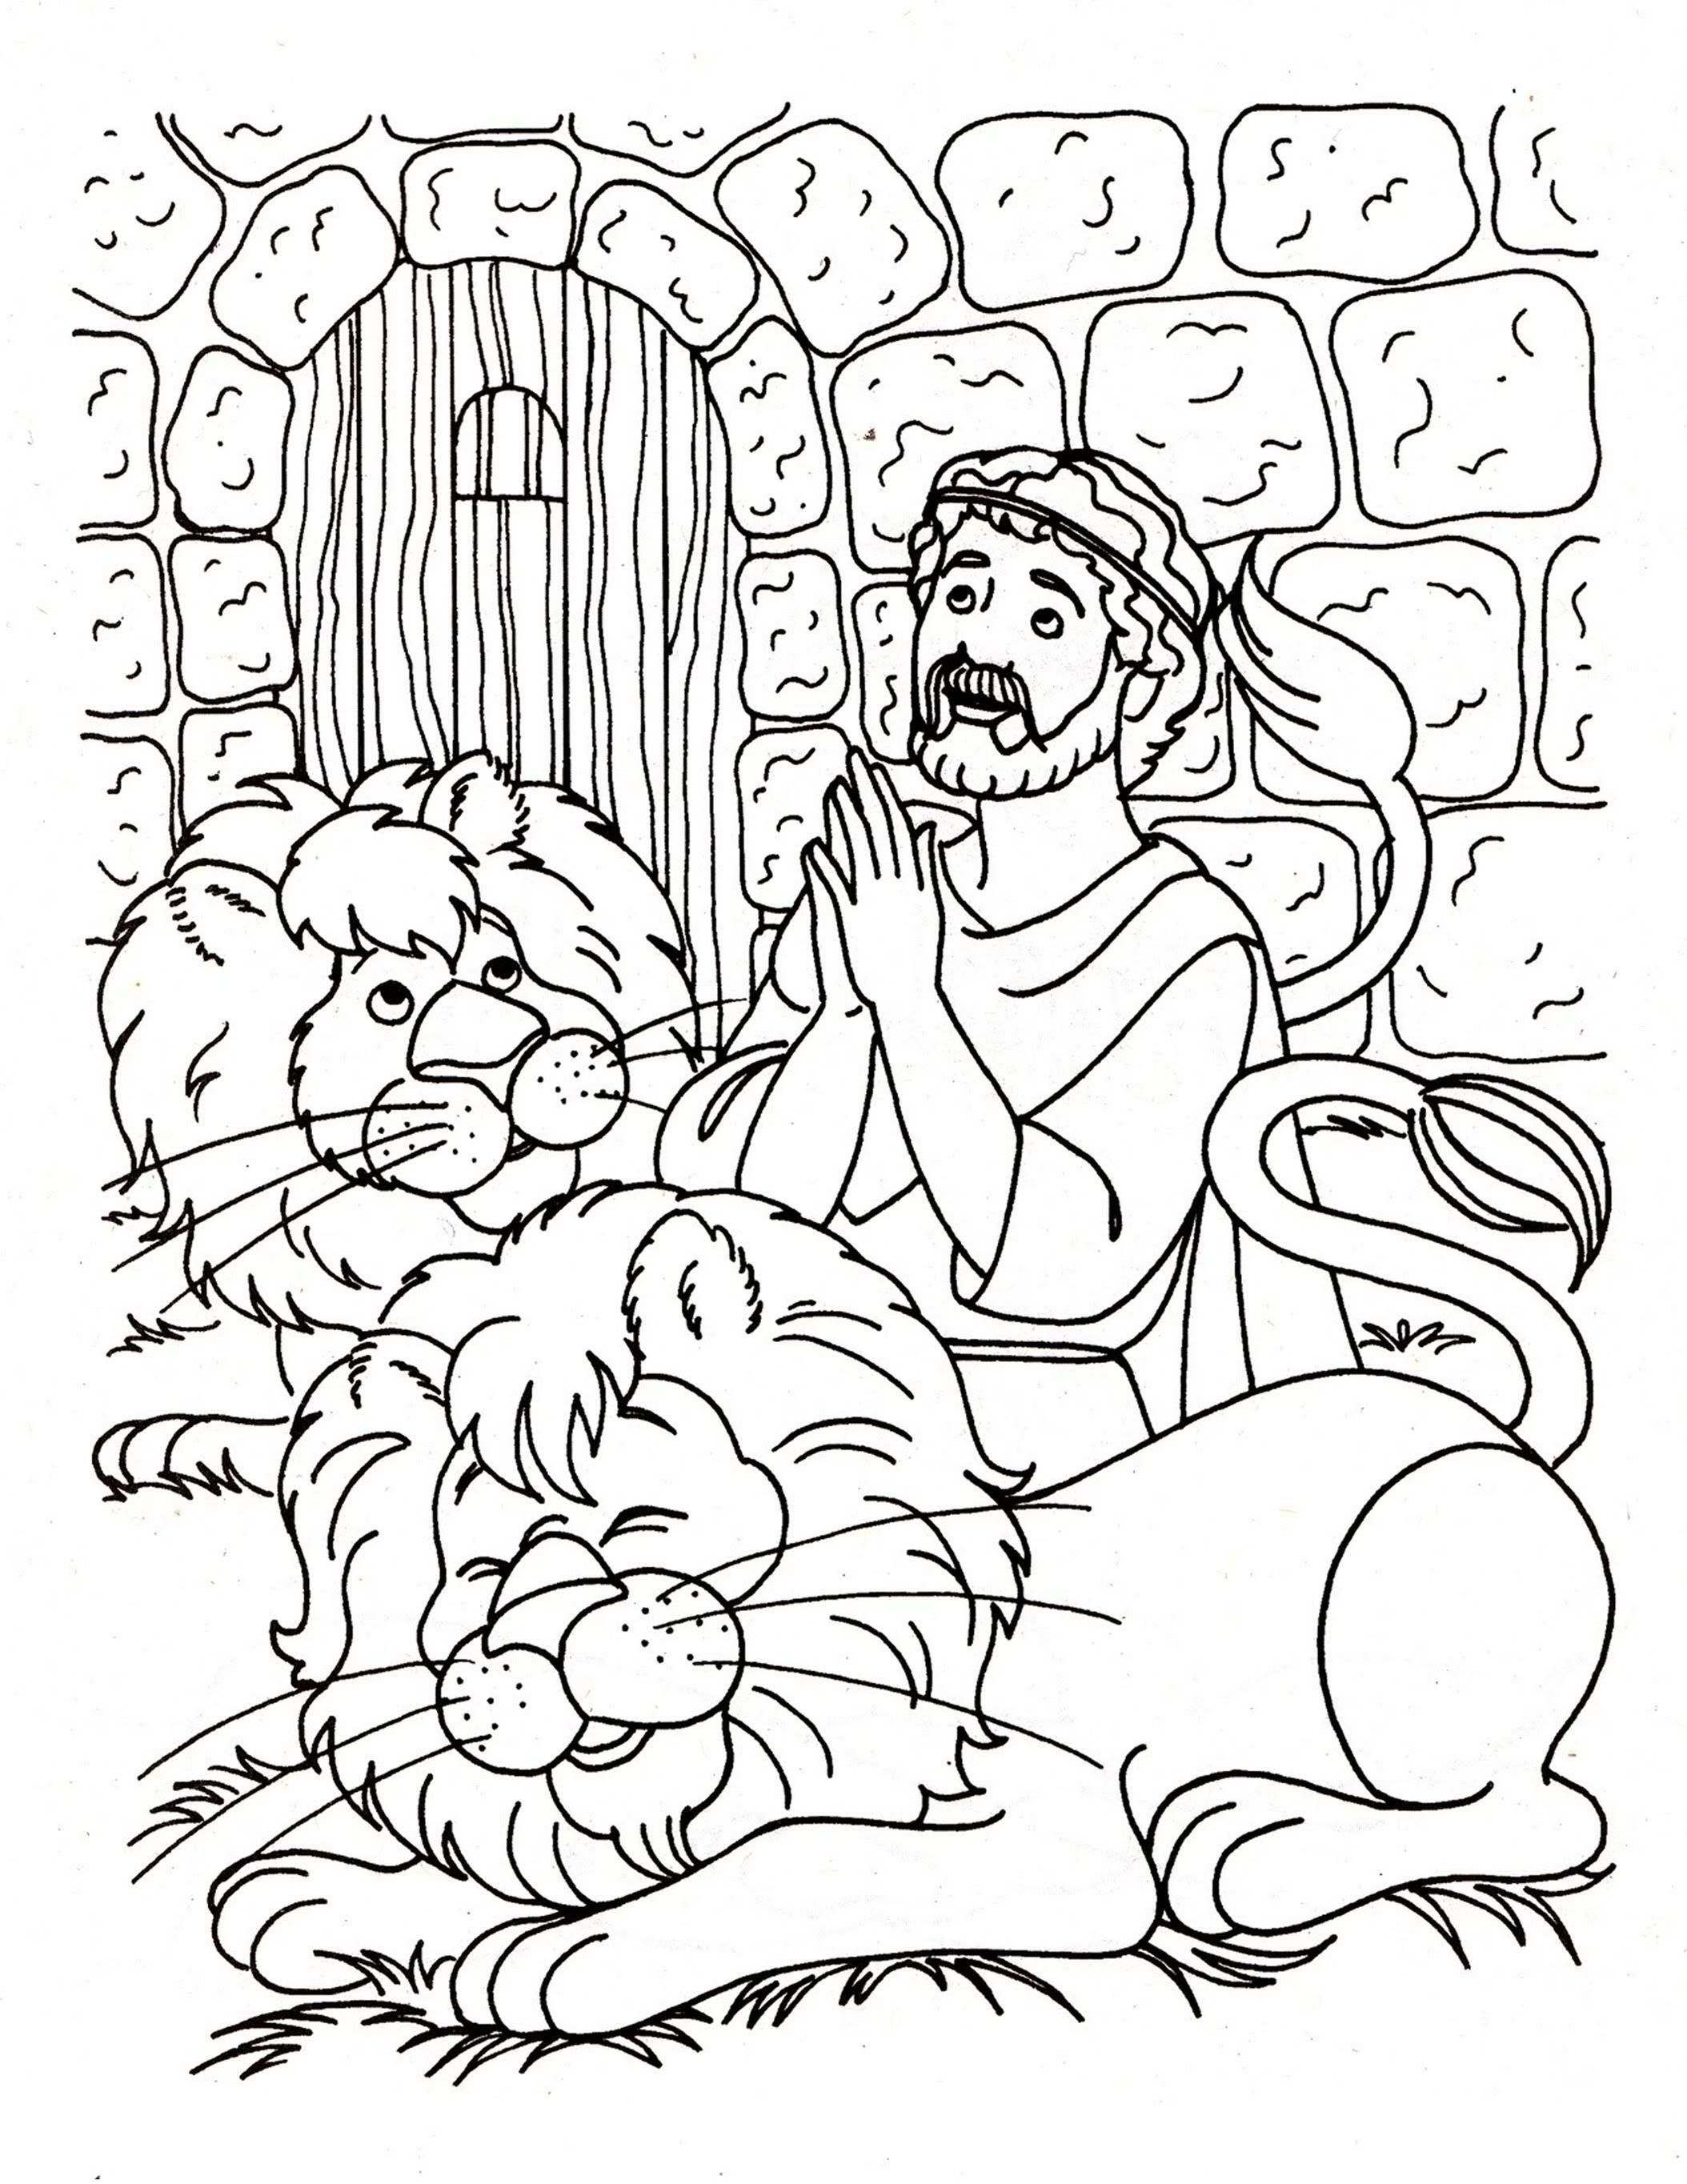 daniel-in-the-lions-den-coloring-page-at-getdrawings-free-download